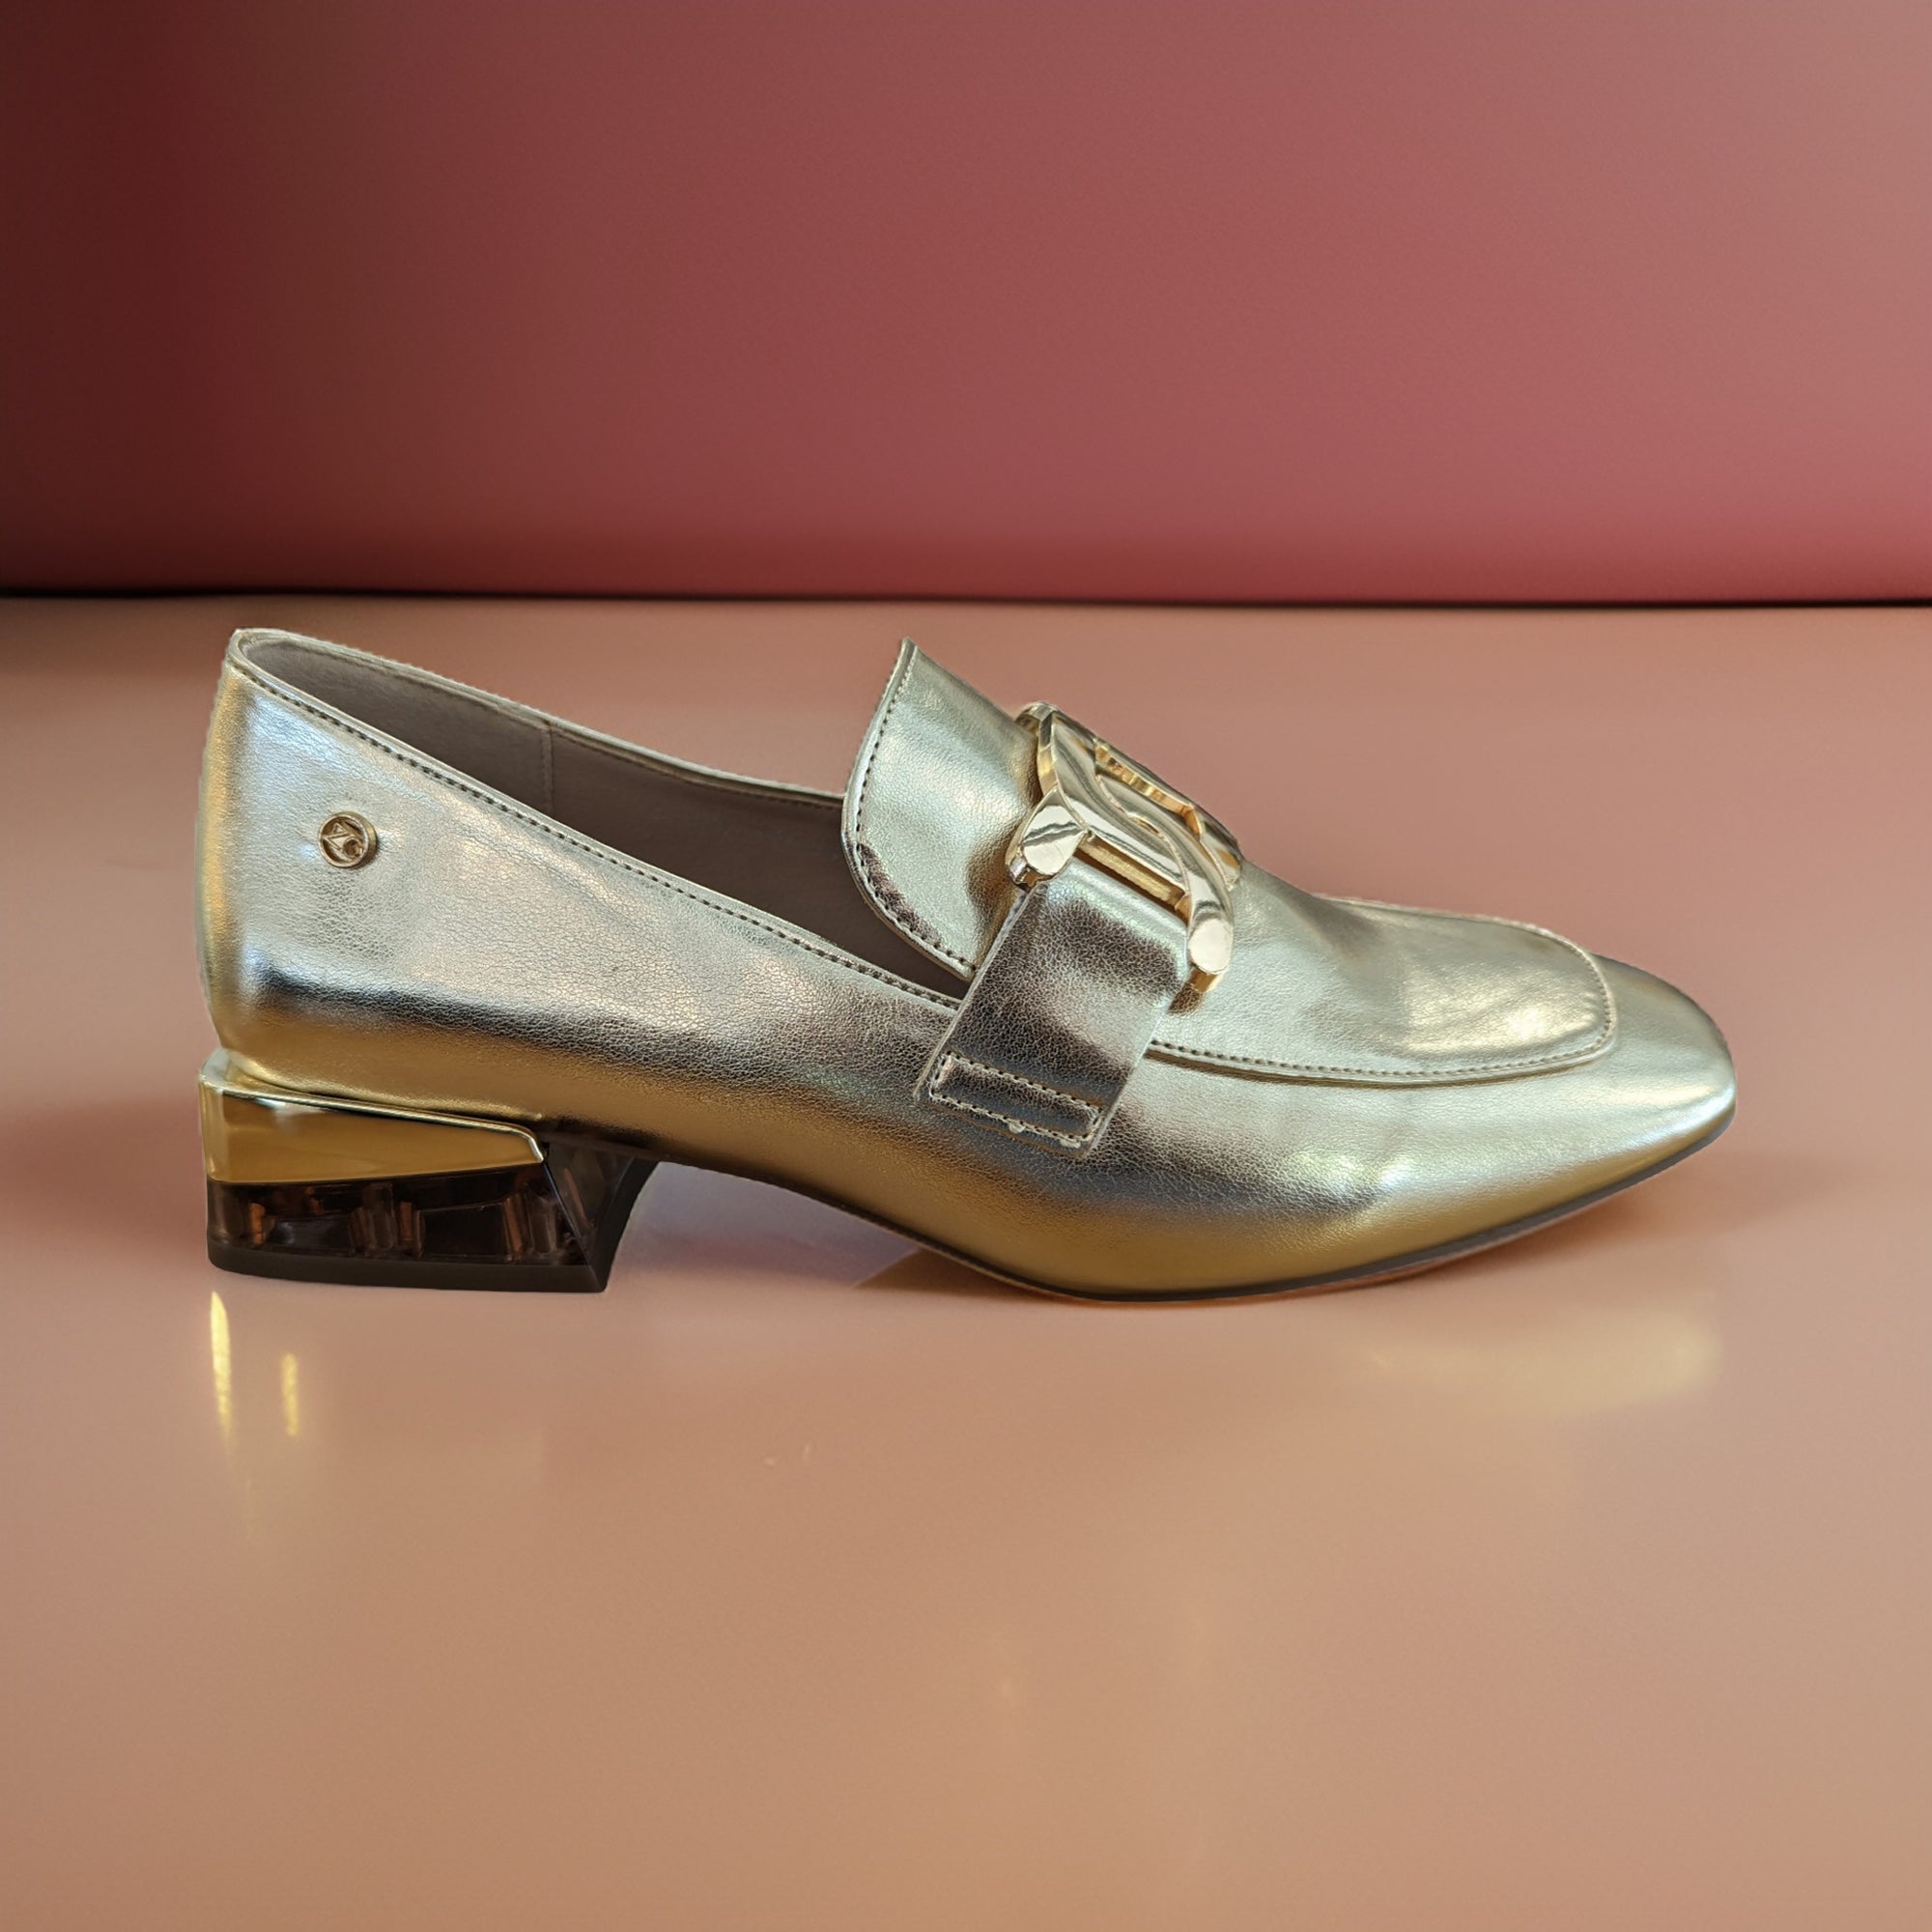     Front view of Zanni & Co Cream Square Toe Loafer with gold chain link.